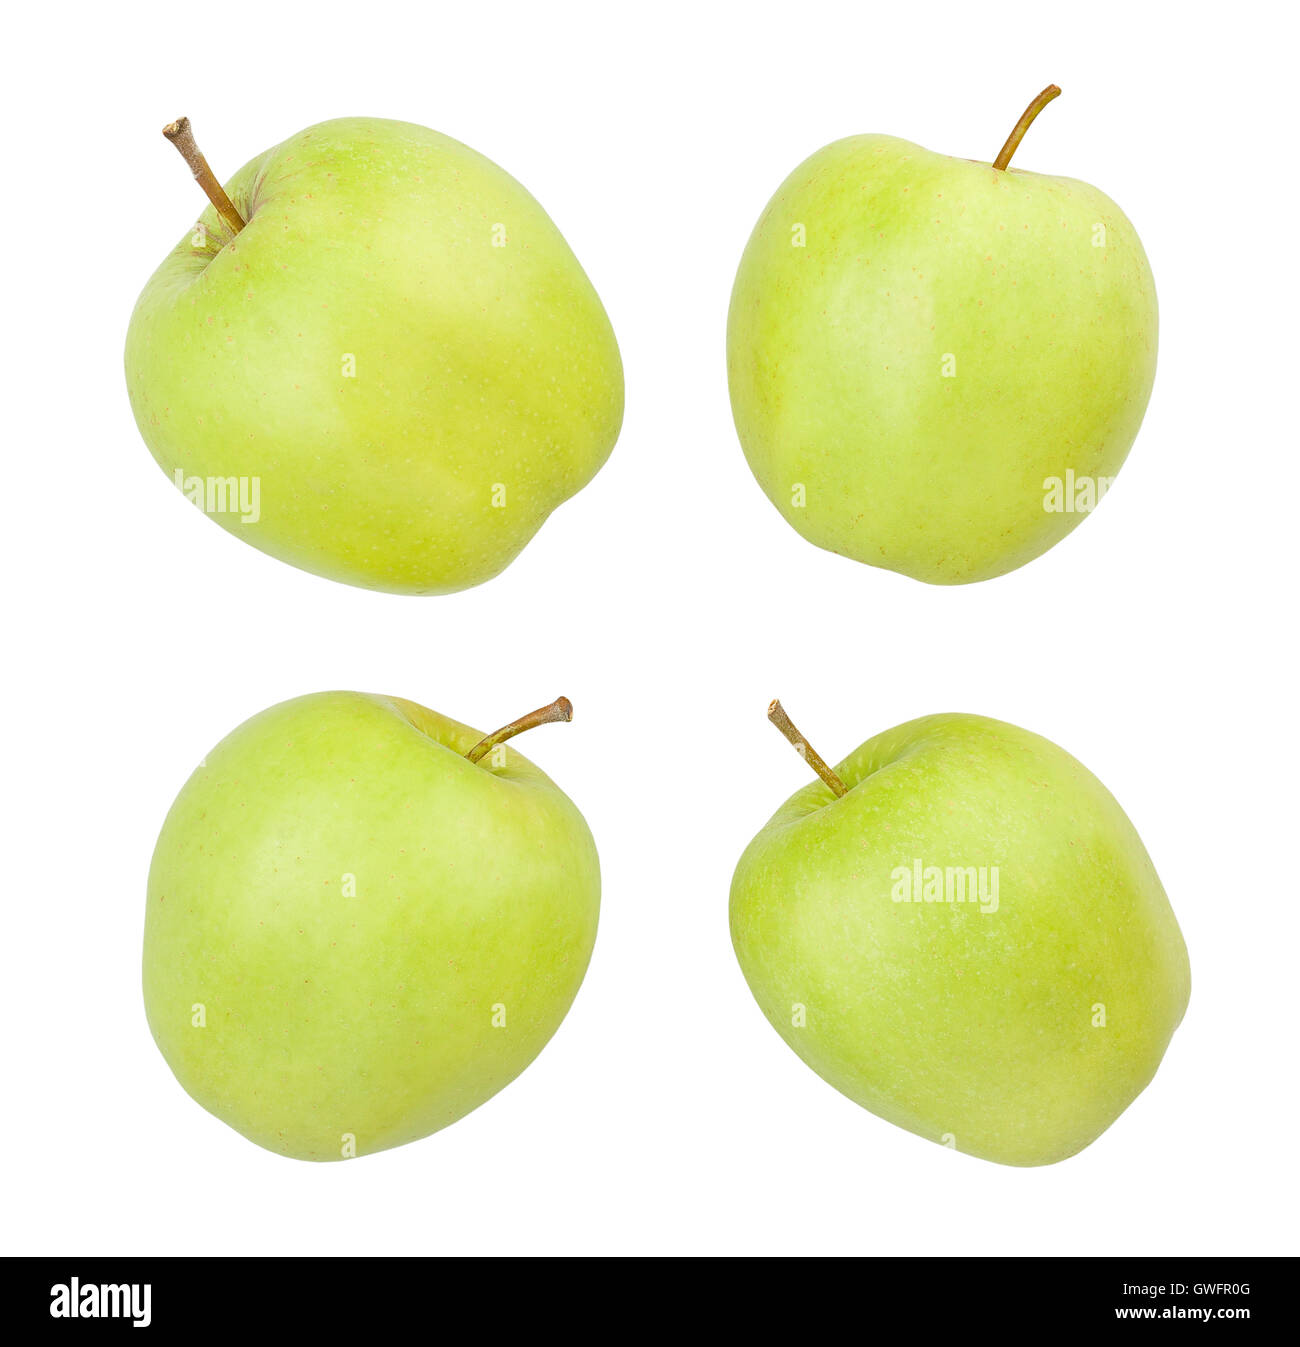 green apples isolated Stock Photo